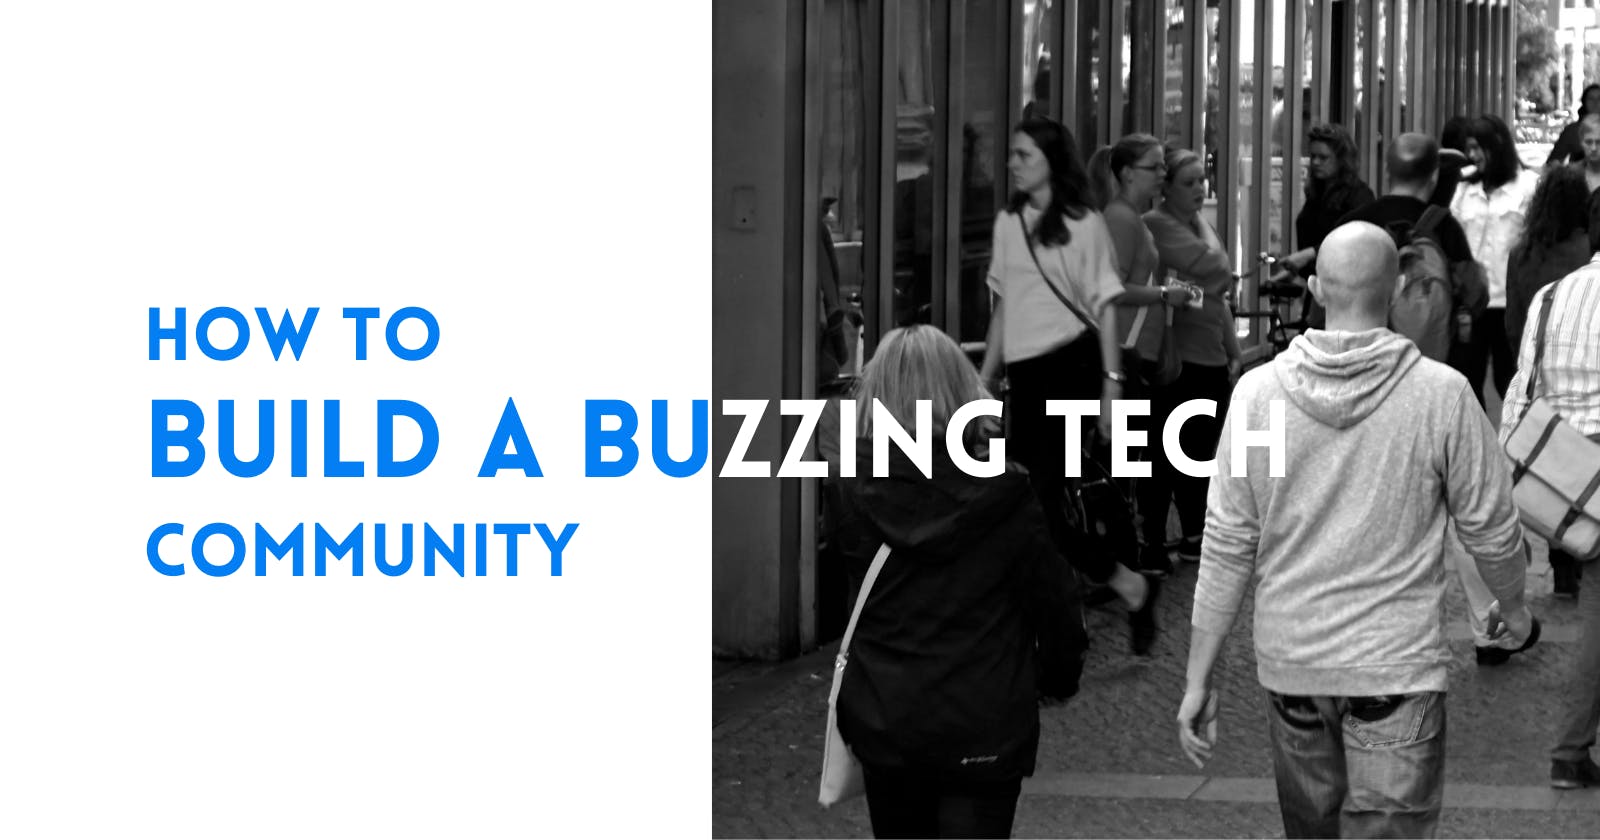 How to build a buzzing tech community